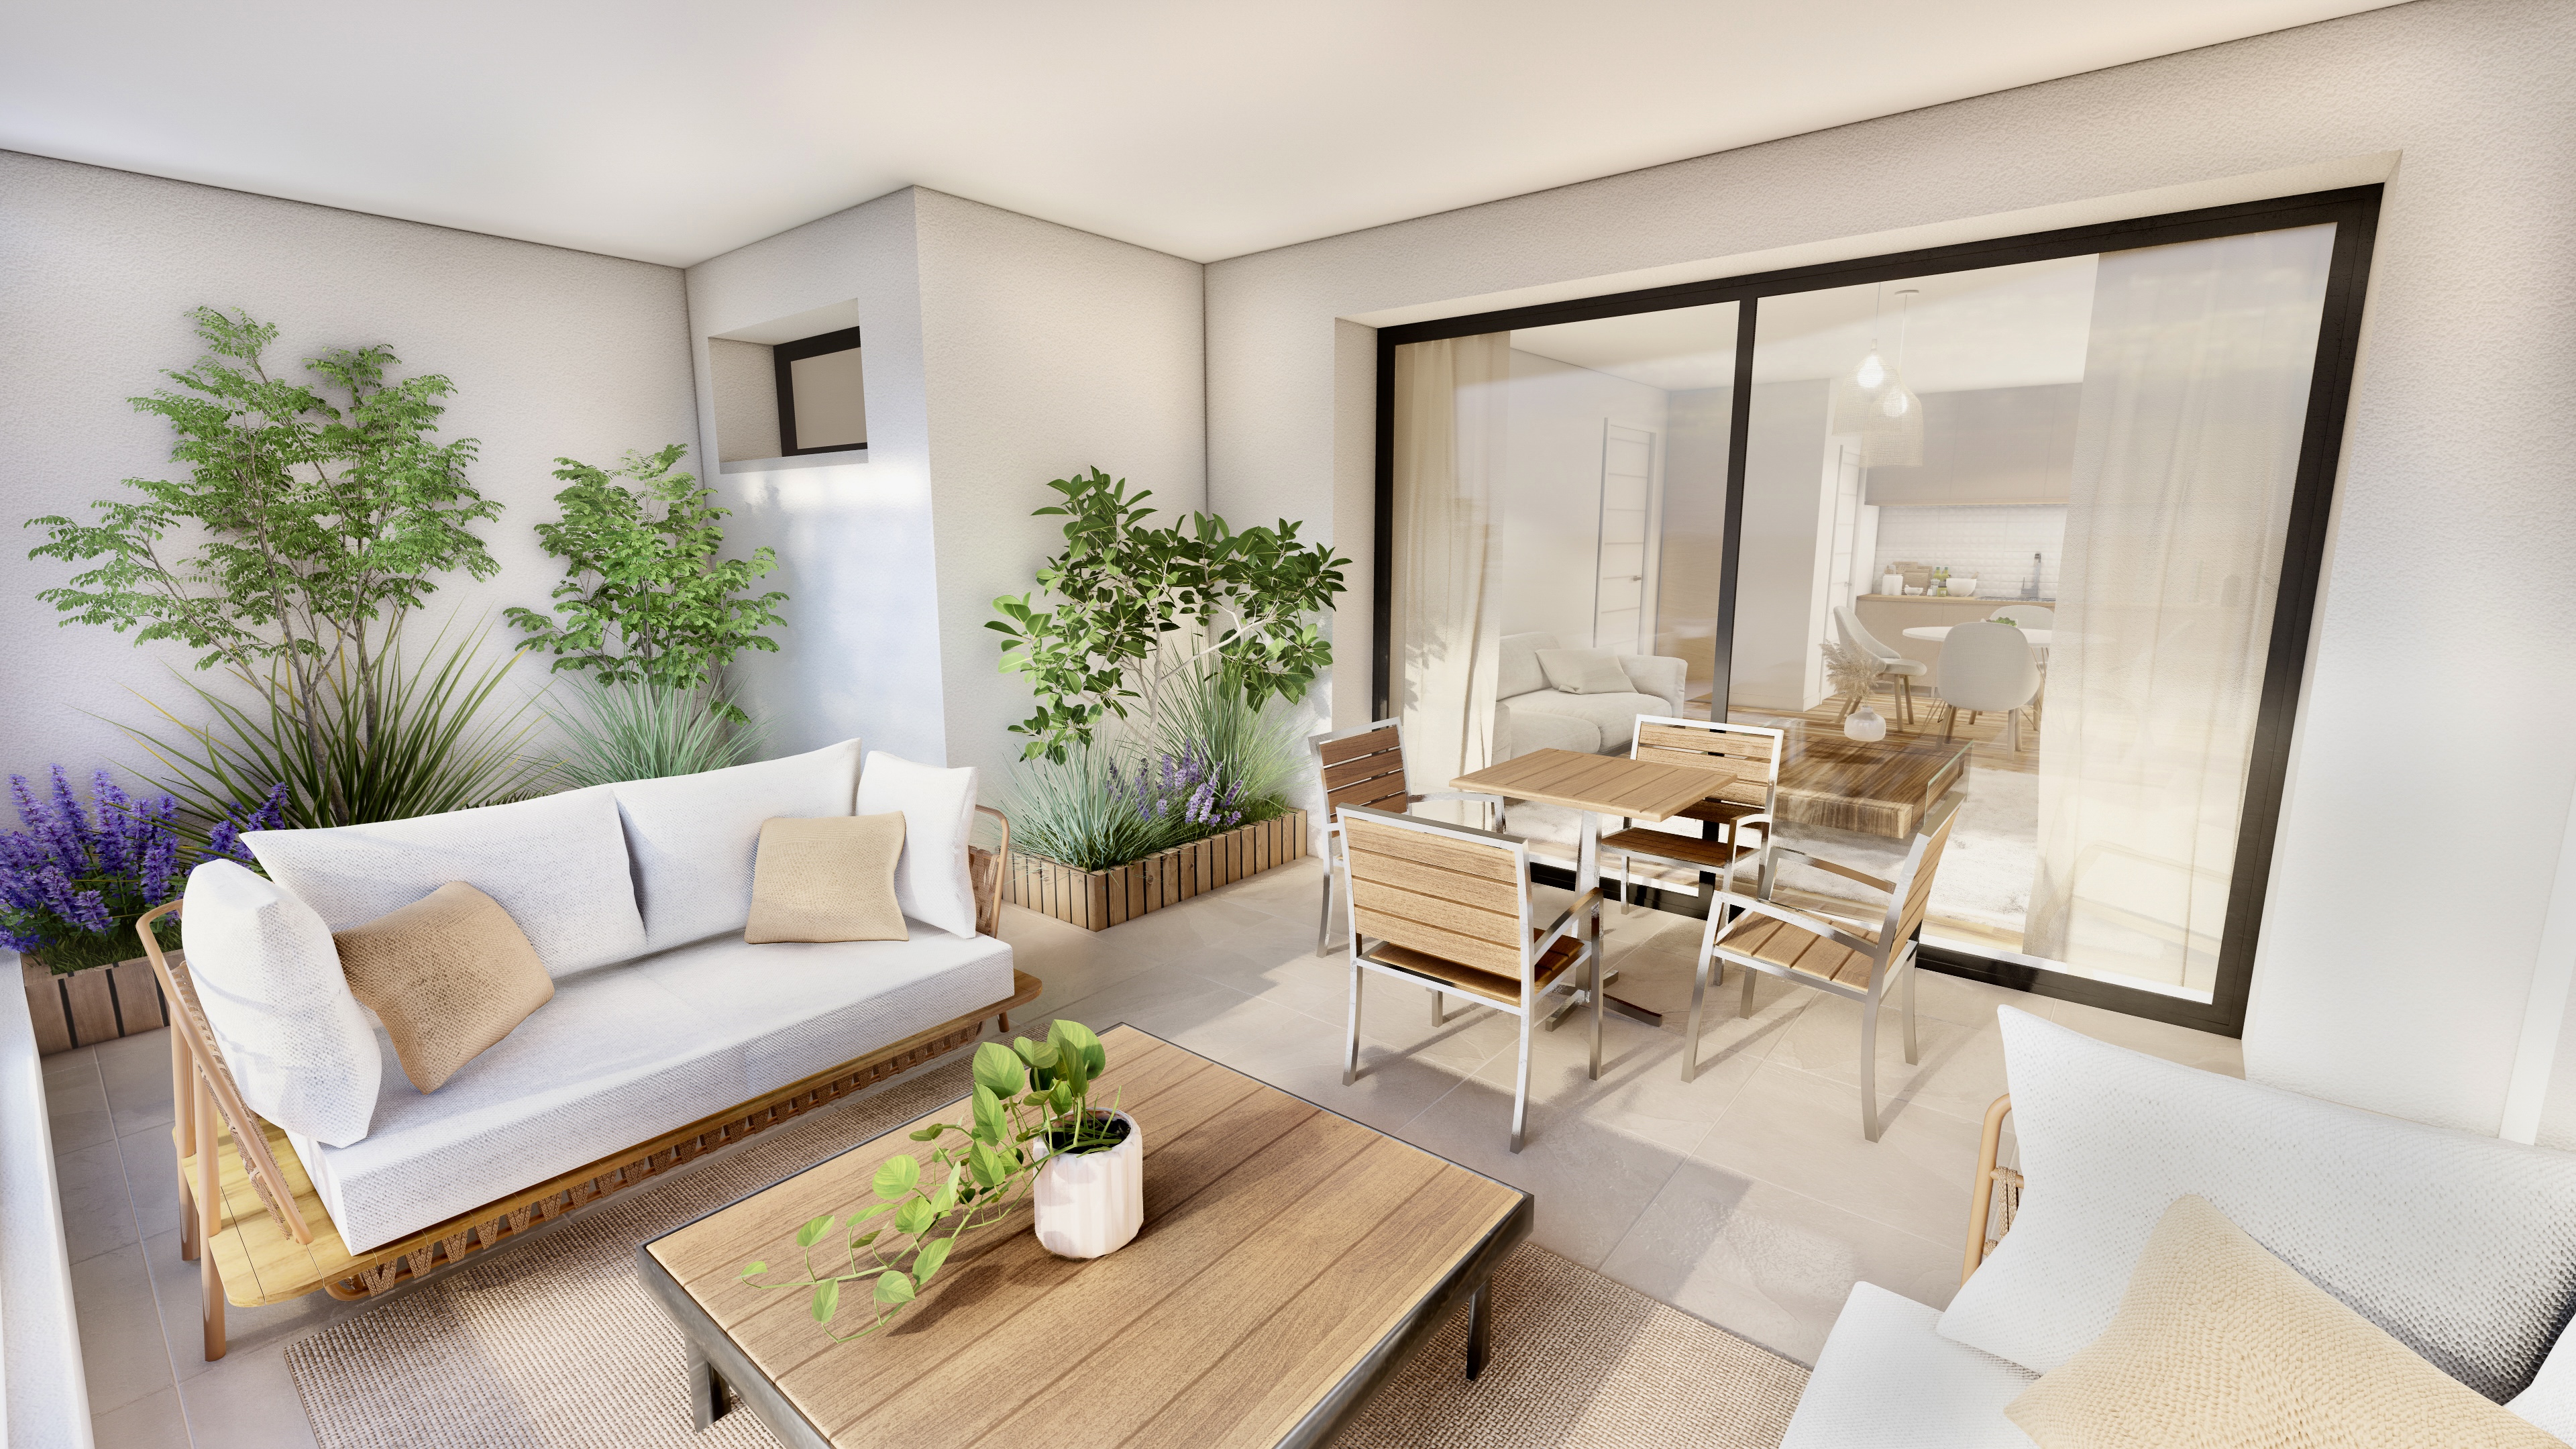 Programme immobilier neuf RESIDENCE MARBELLA